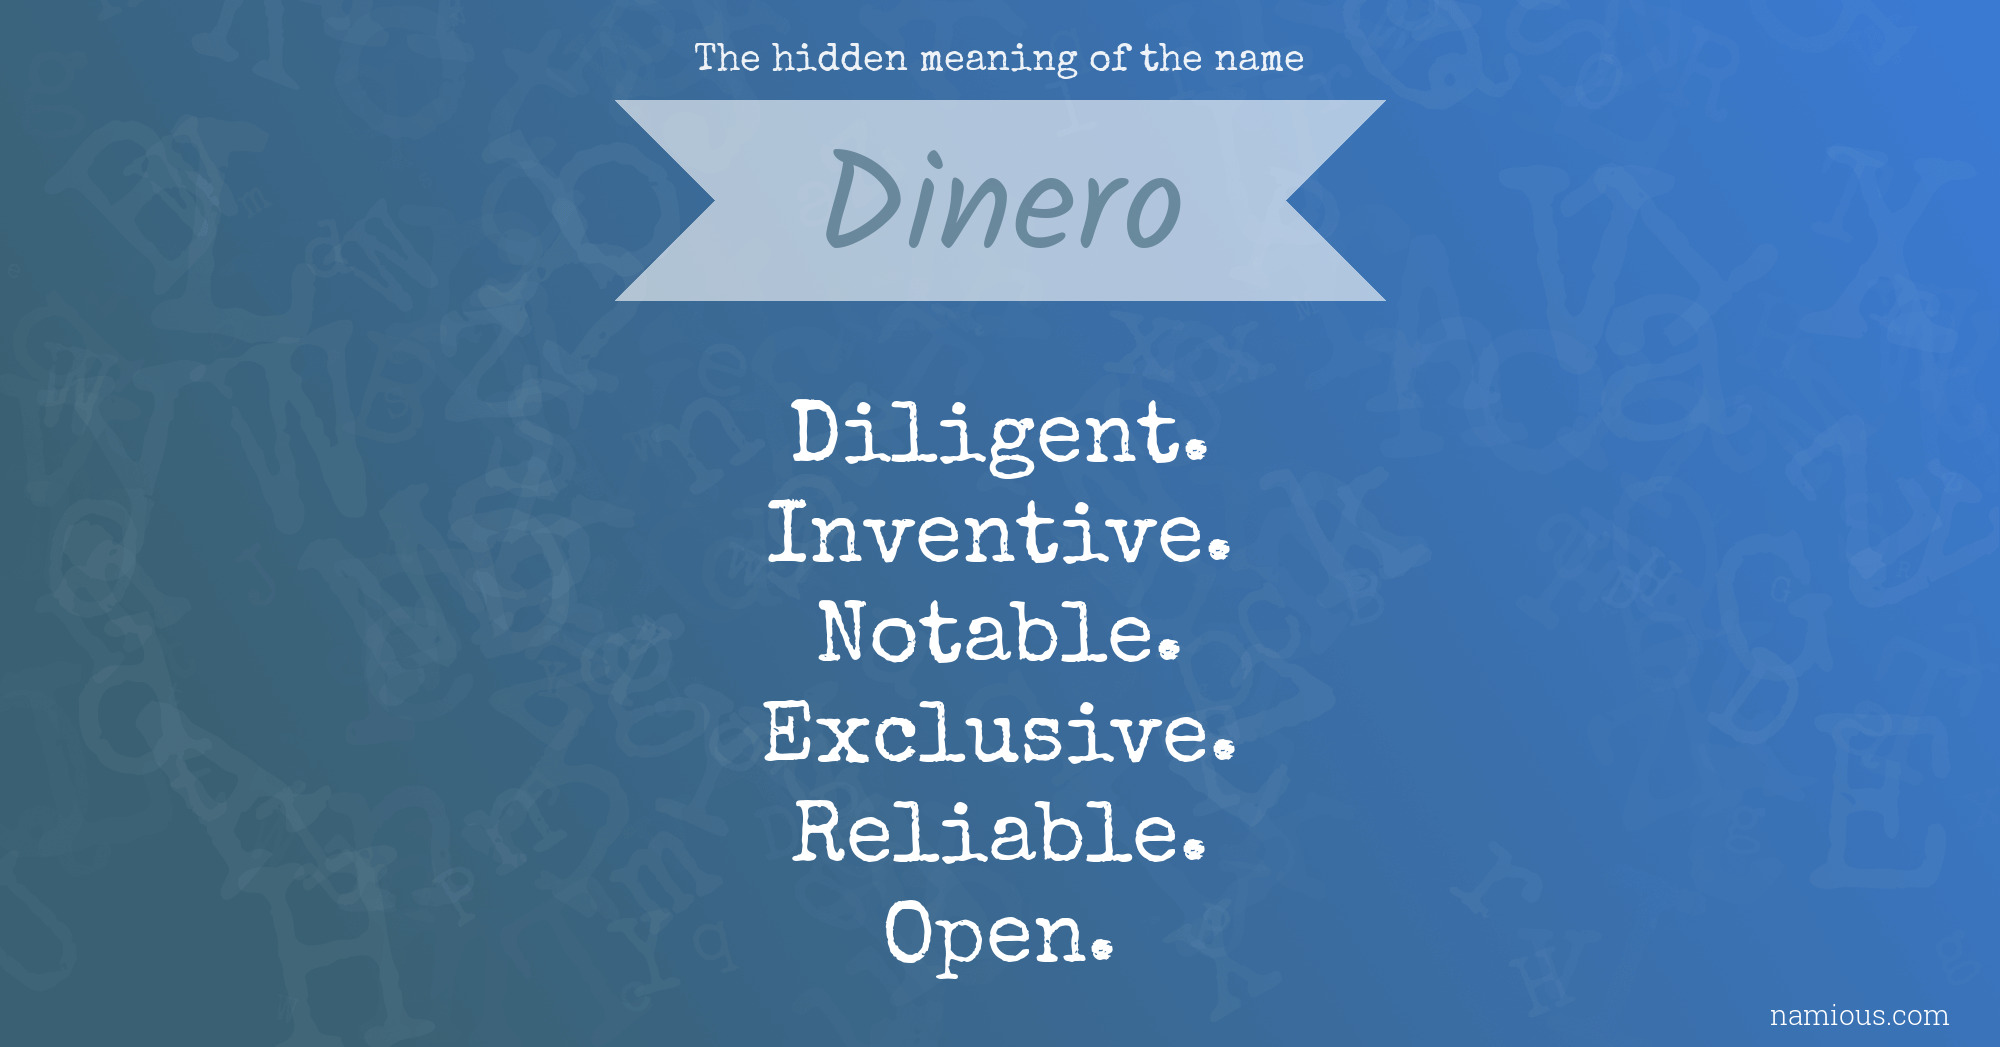 Meaning dinero